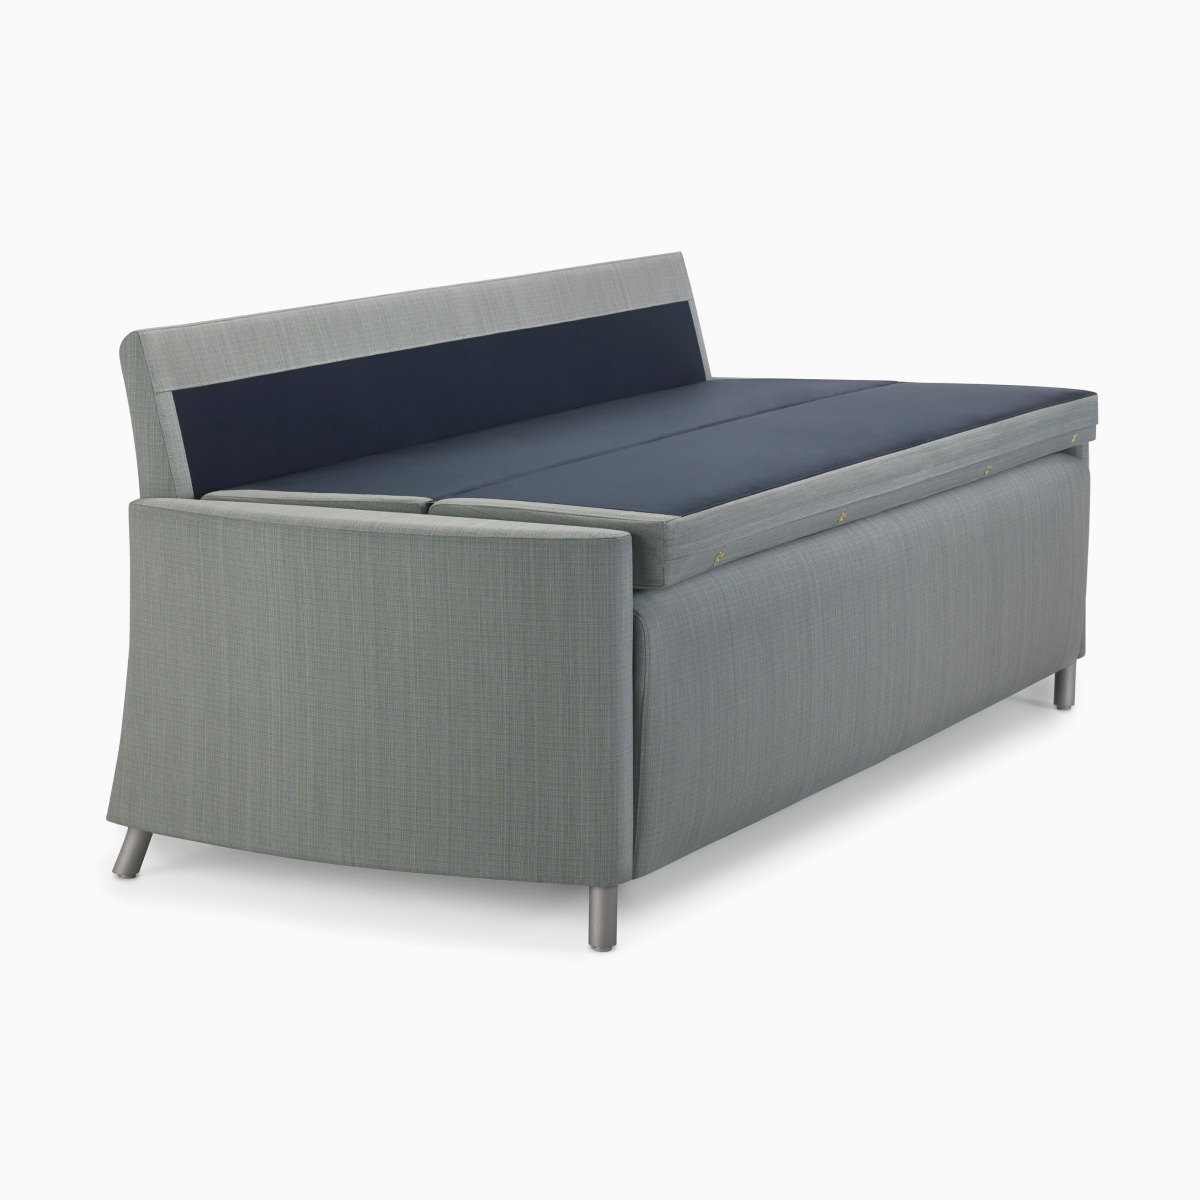 Nemschoff Pamona Flop Sofa in a gray upholstery with the sleep surface open, viewed from an angle.